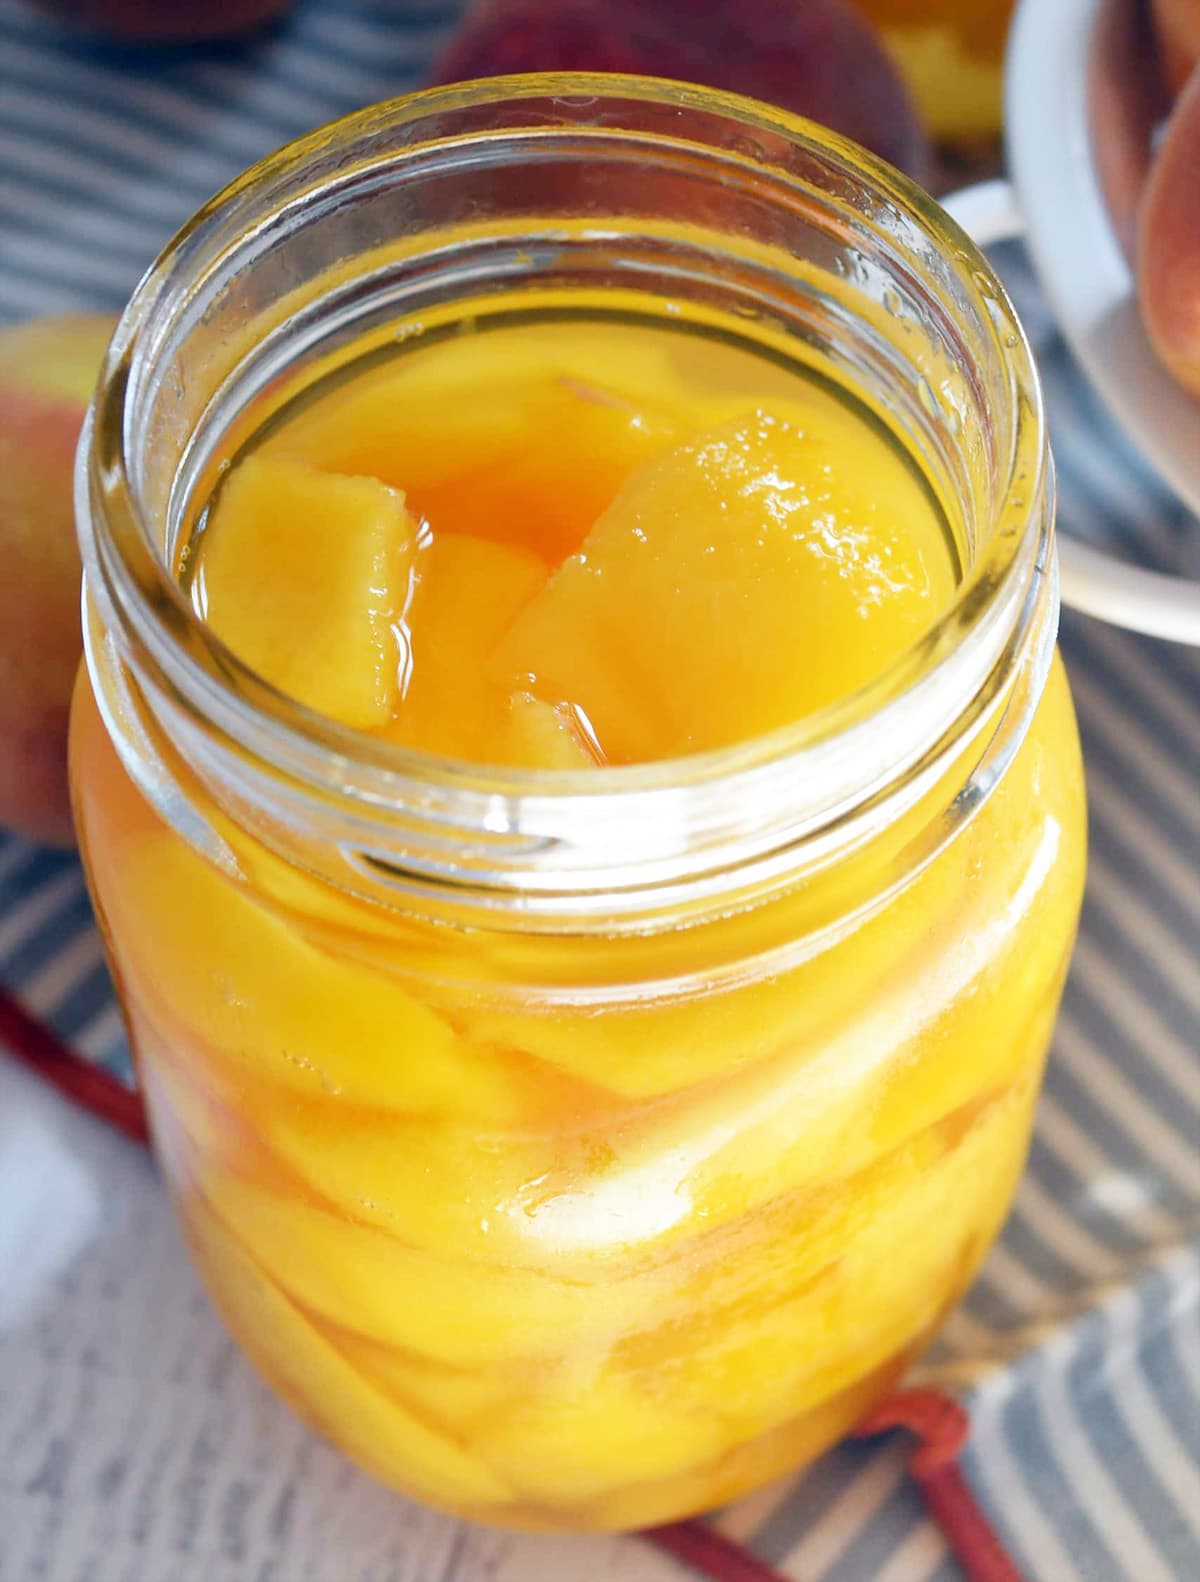 One open pint jar of yellow peaches